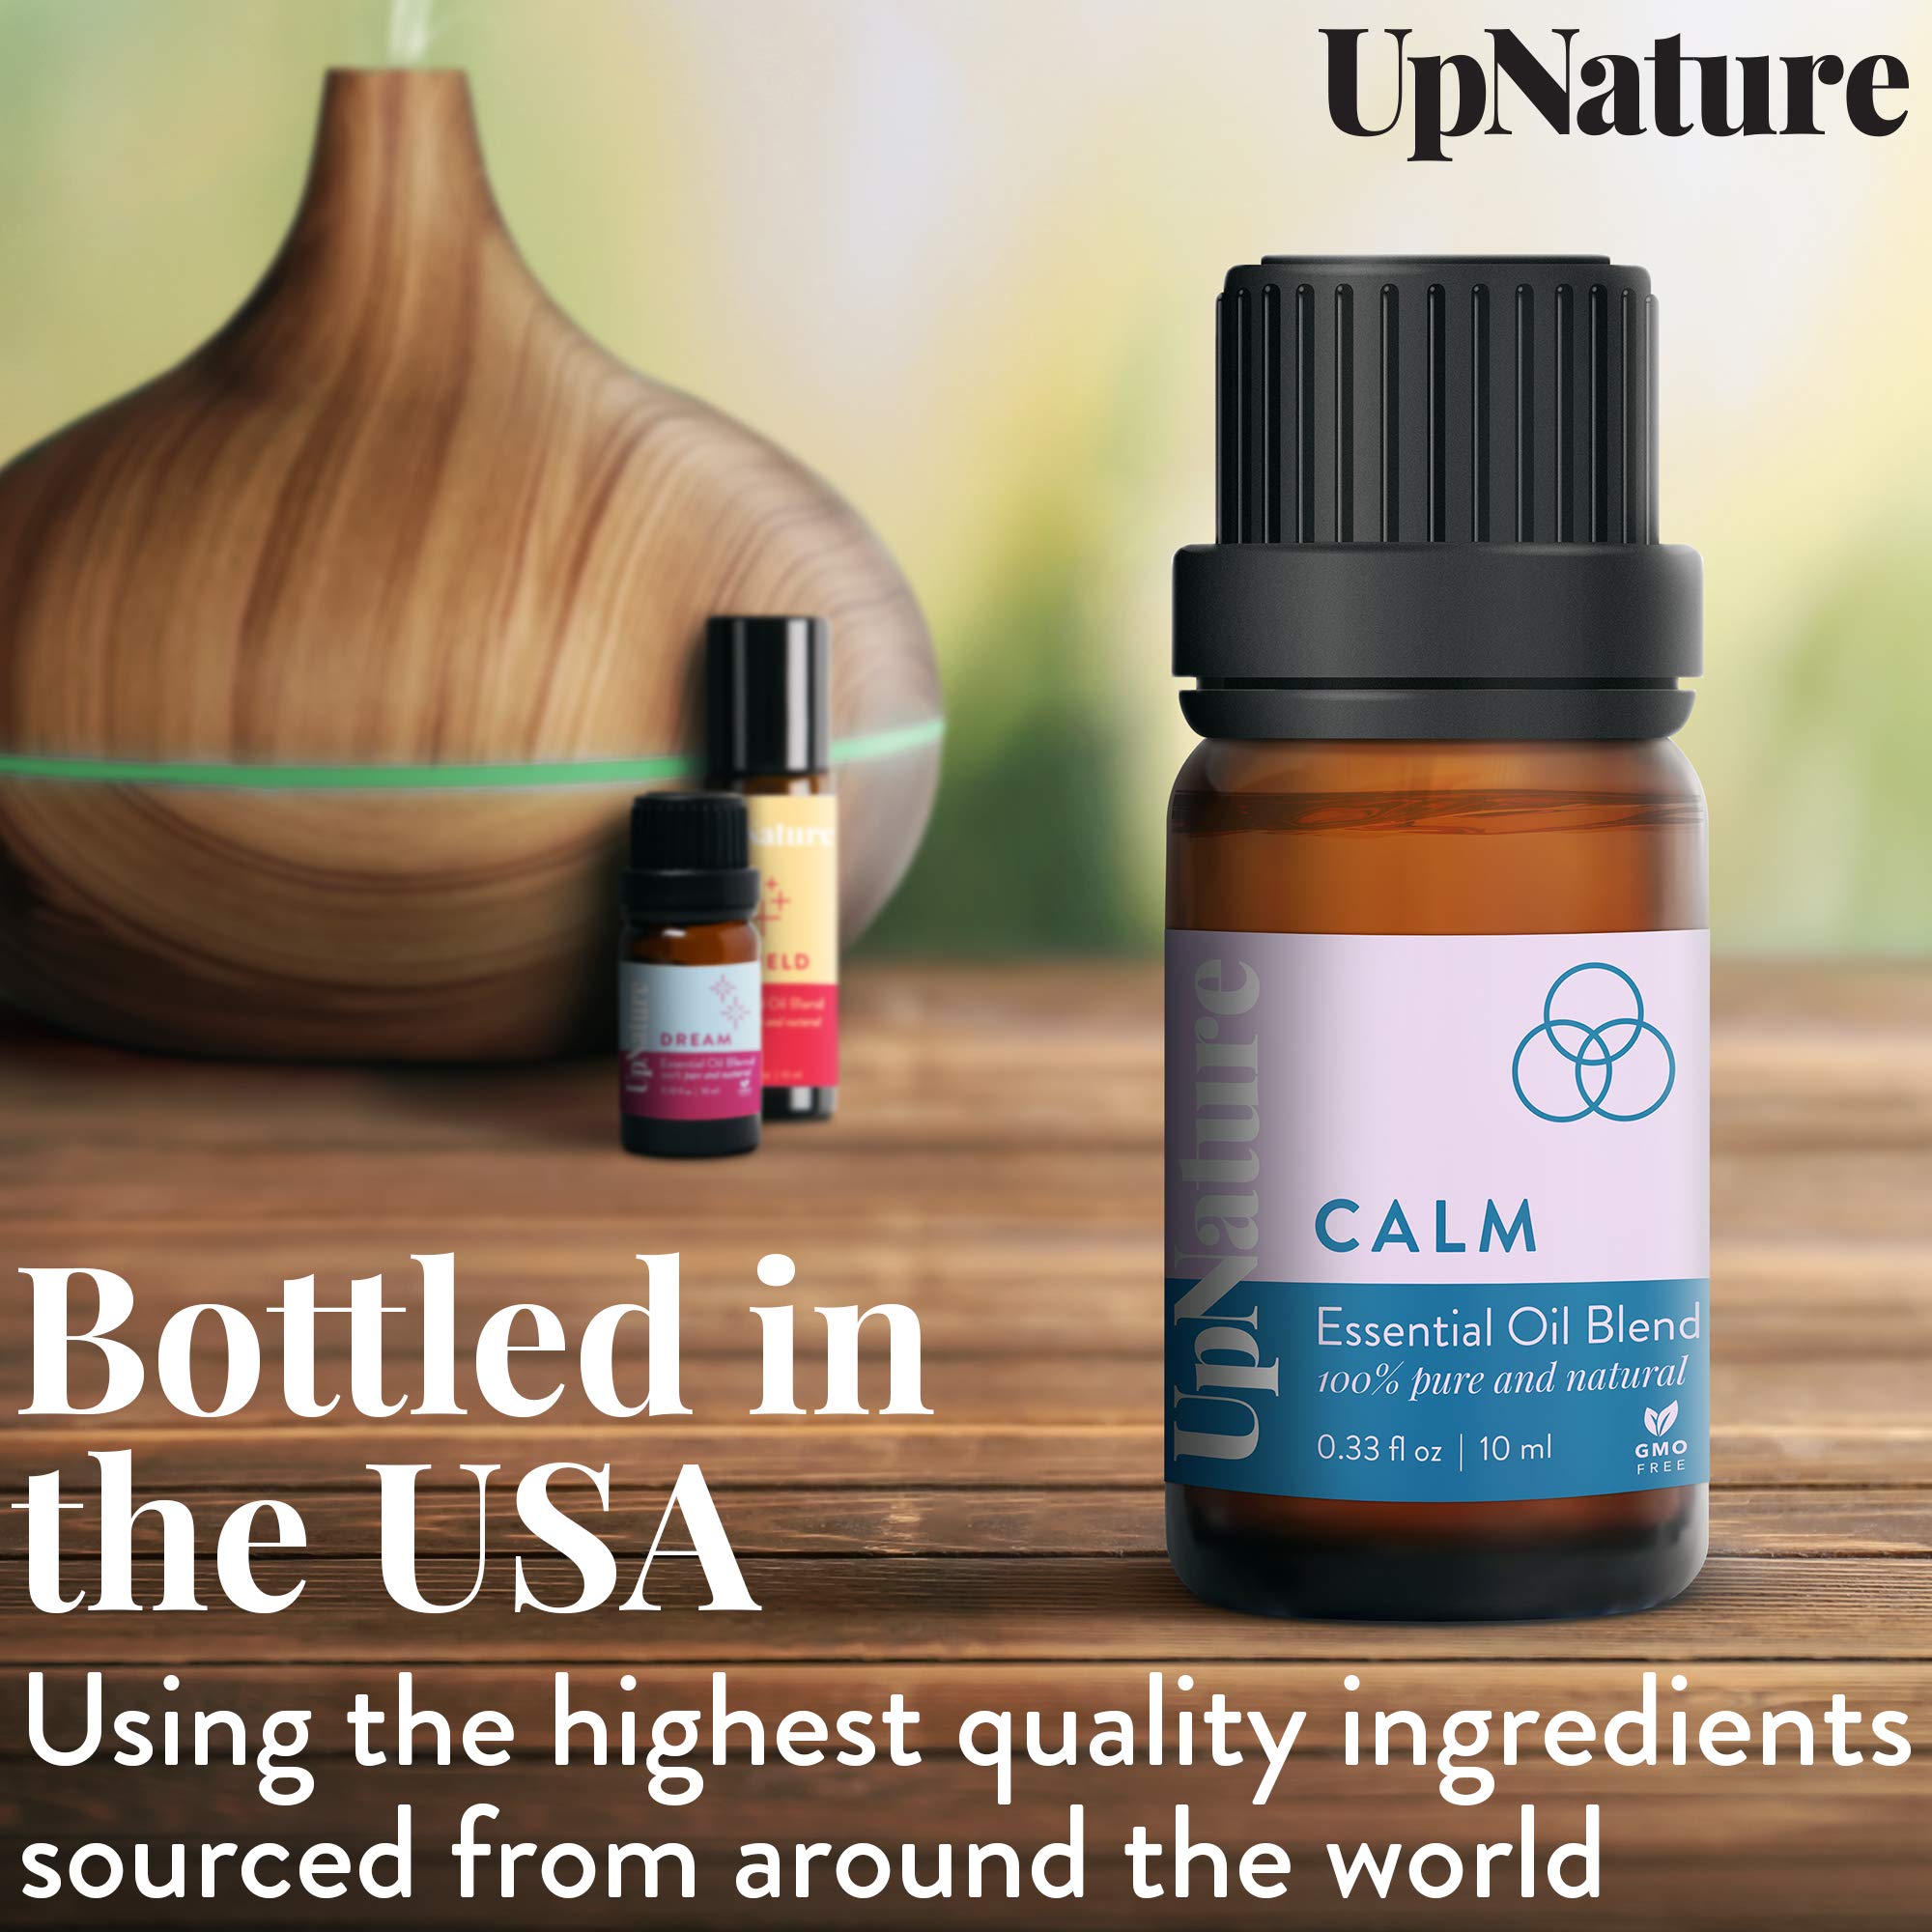 UpNature Calm Essential Oil - 100% Pure, 10 Milliliters, Blend of Peppermint, Spanish Sage, Cardamom, Ginger, Sweet Fennel for Stress Relief, Menopause Symptoms